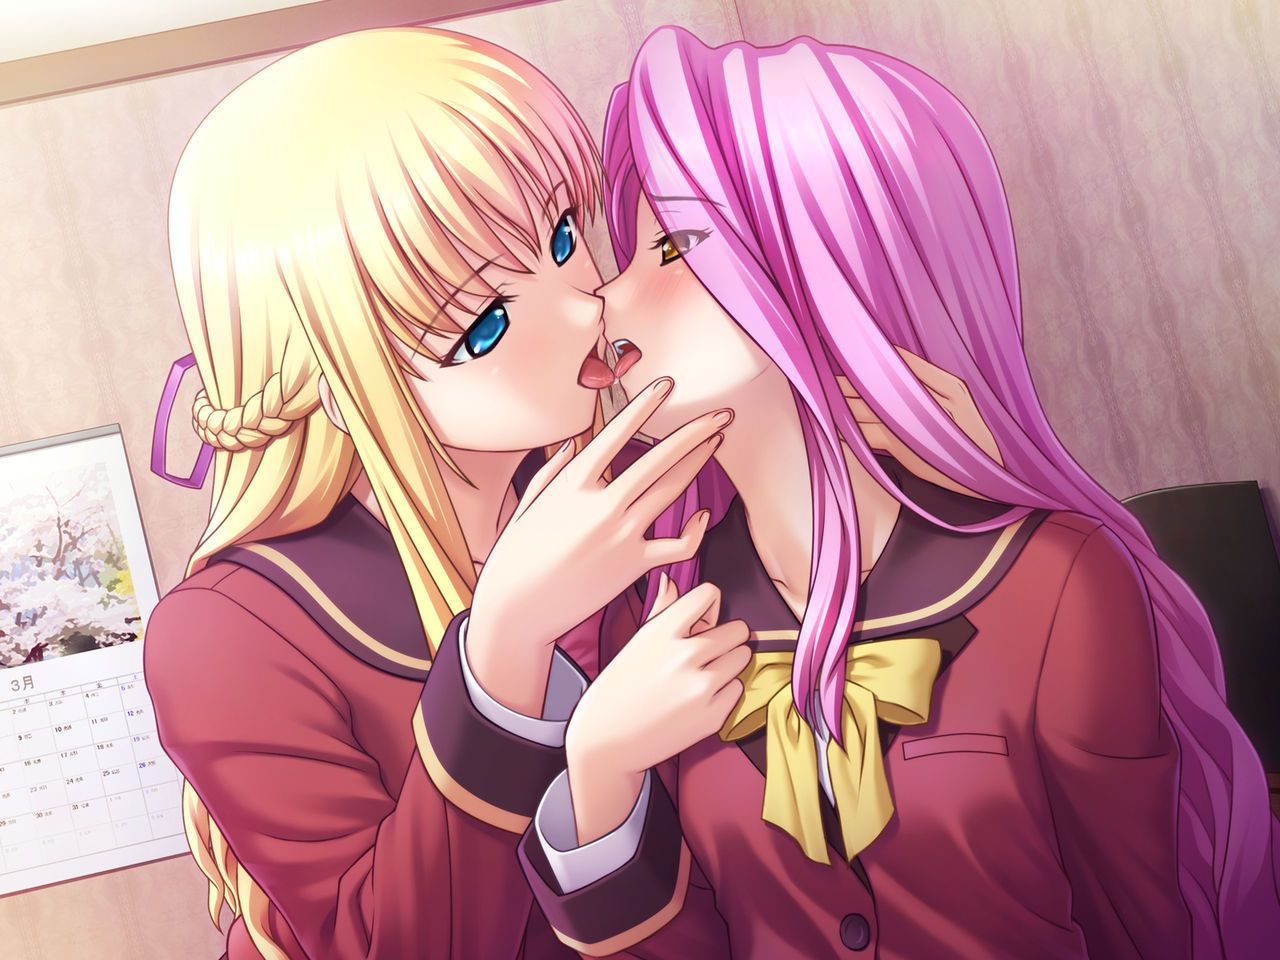 [Yuri] Flirting lesbian erotic image of a girl with each other 3 [2-d] 49